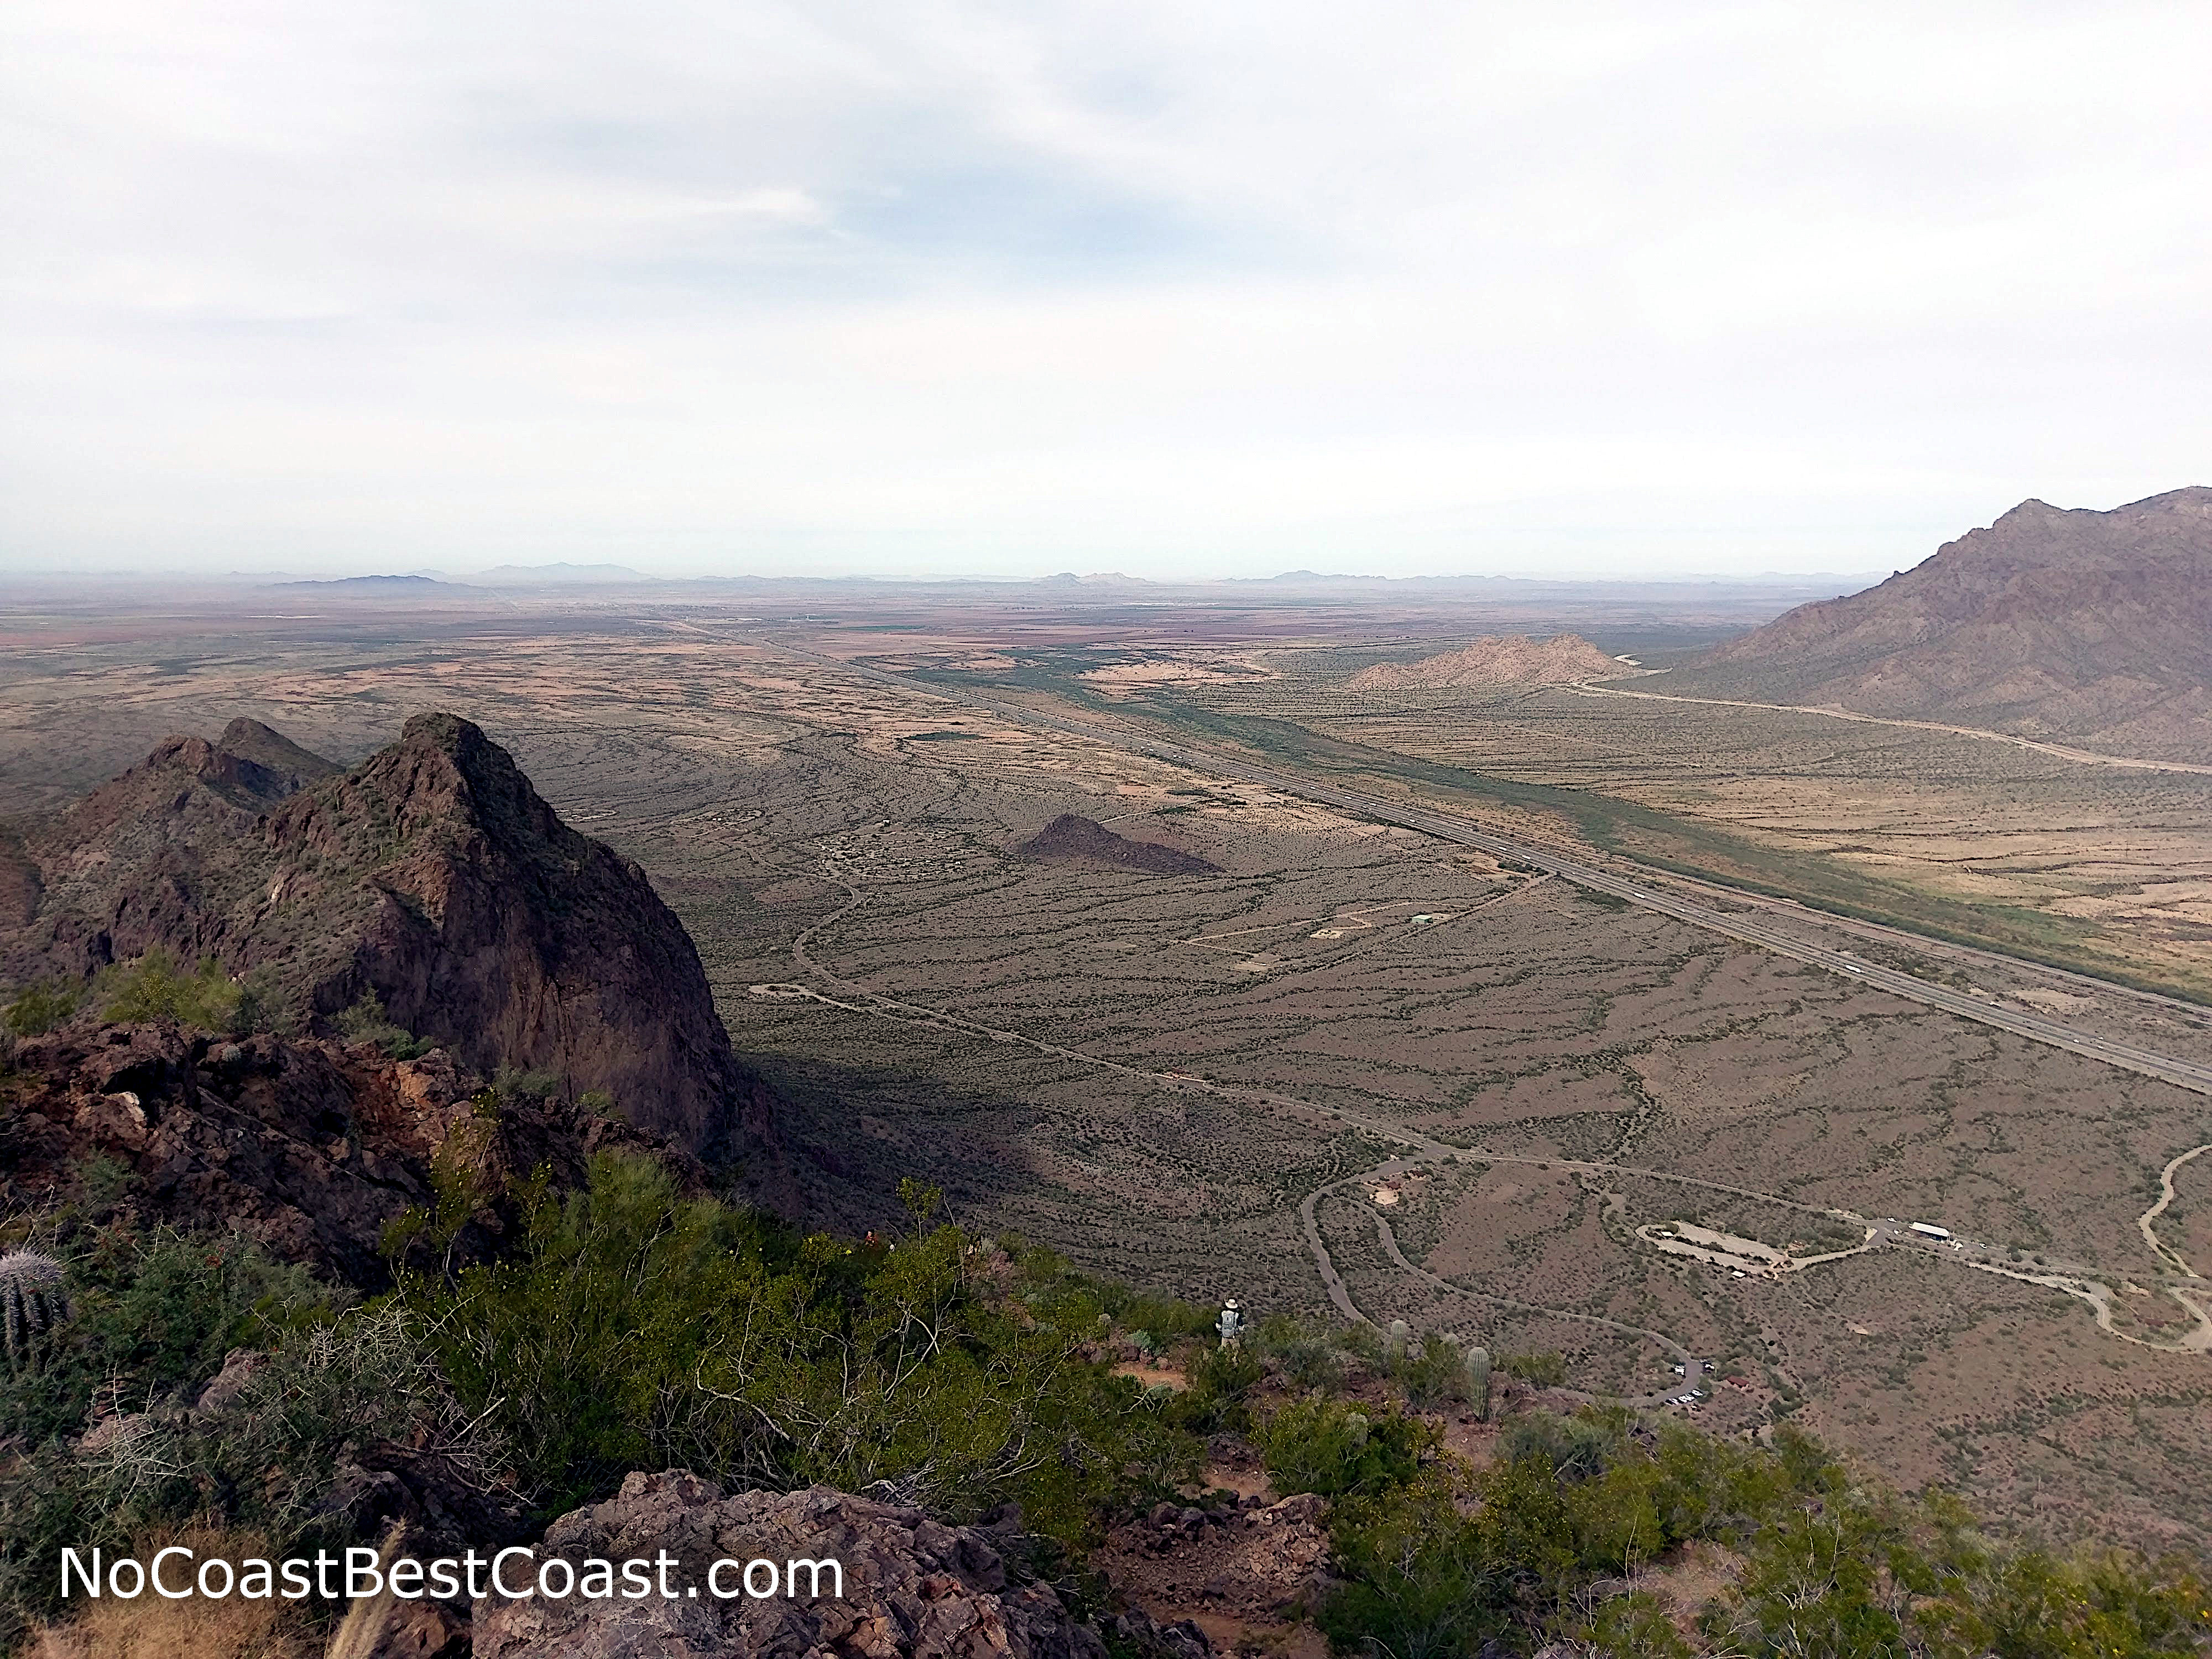 Looking north along I-10 on the summit of Picacho Peak